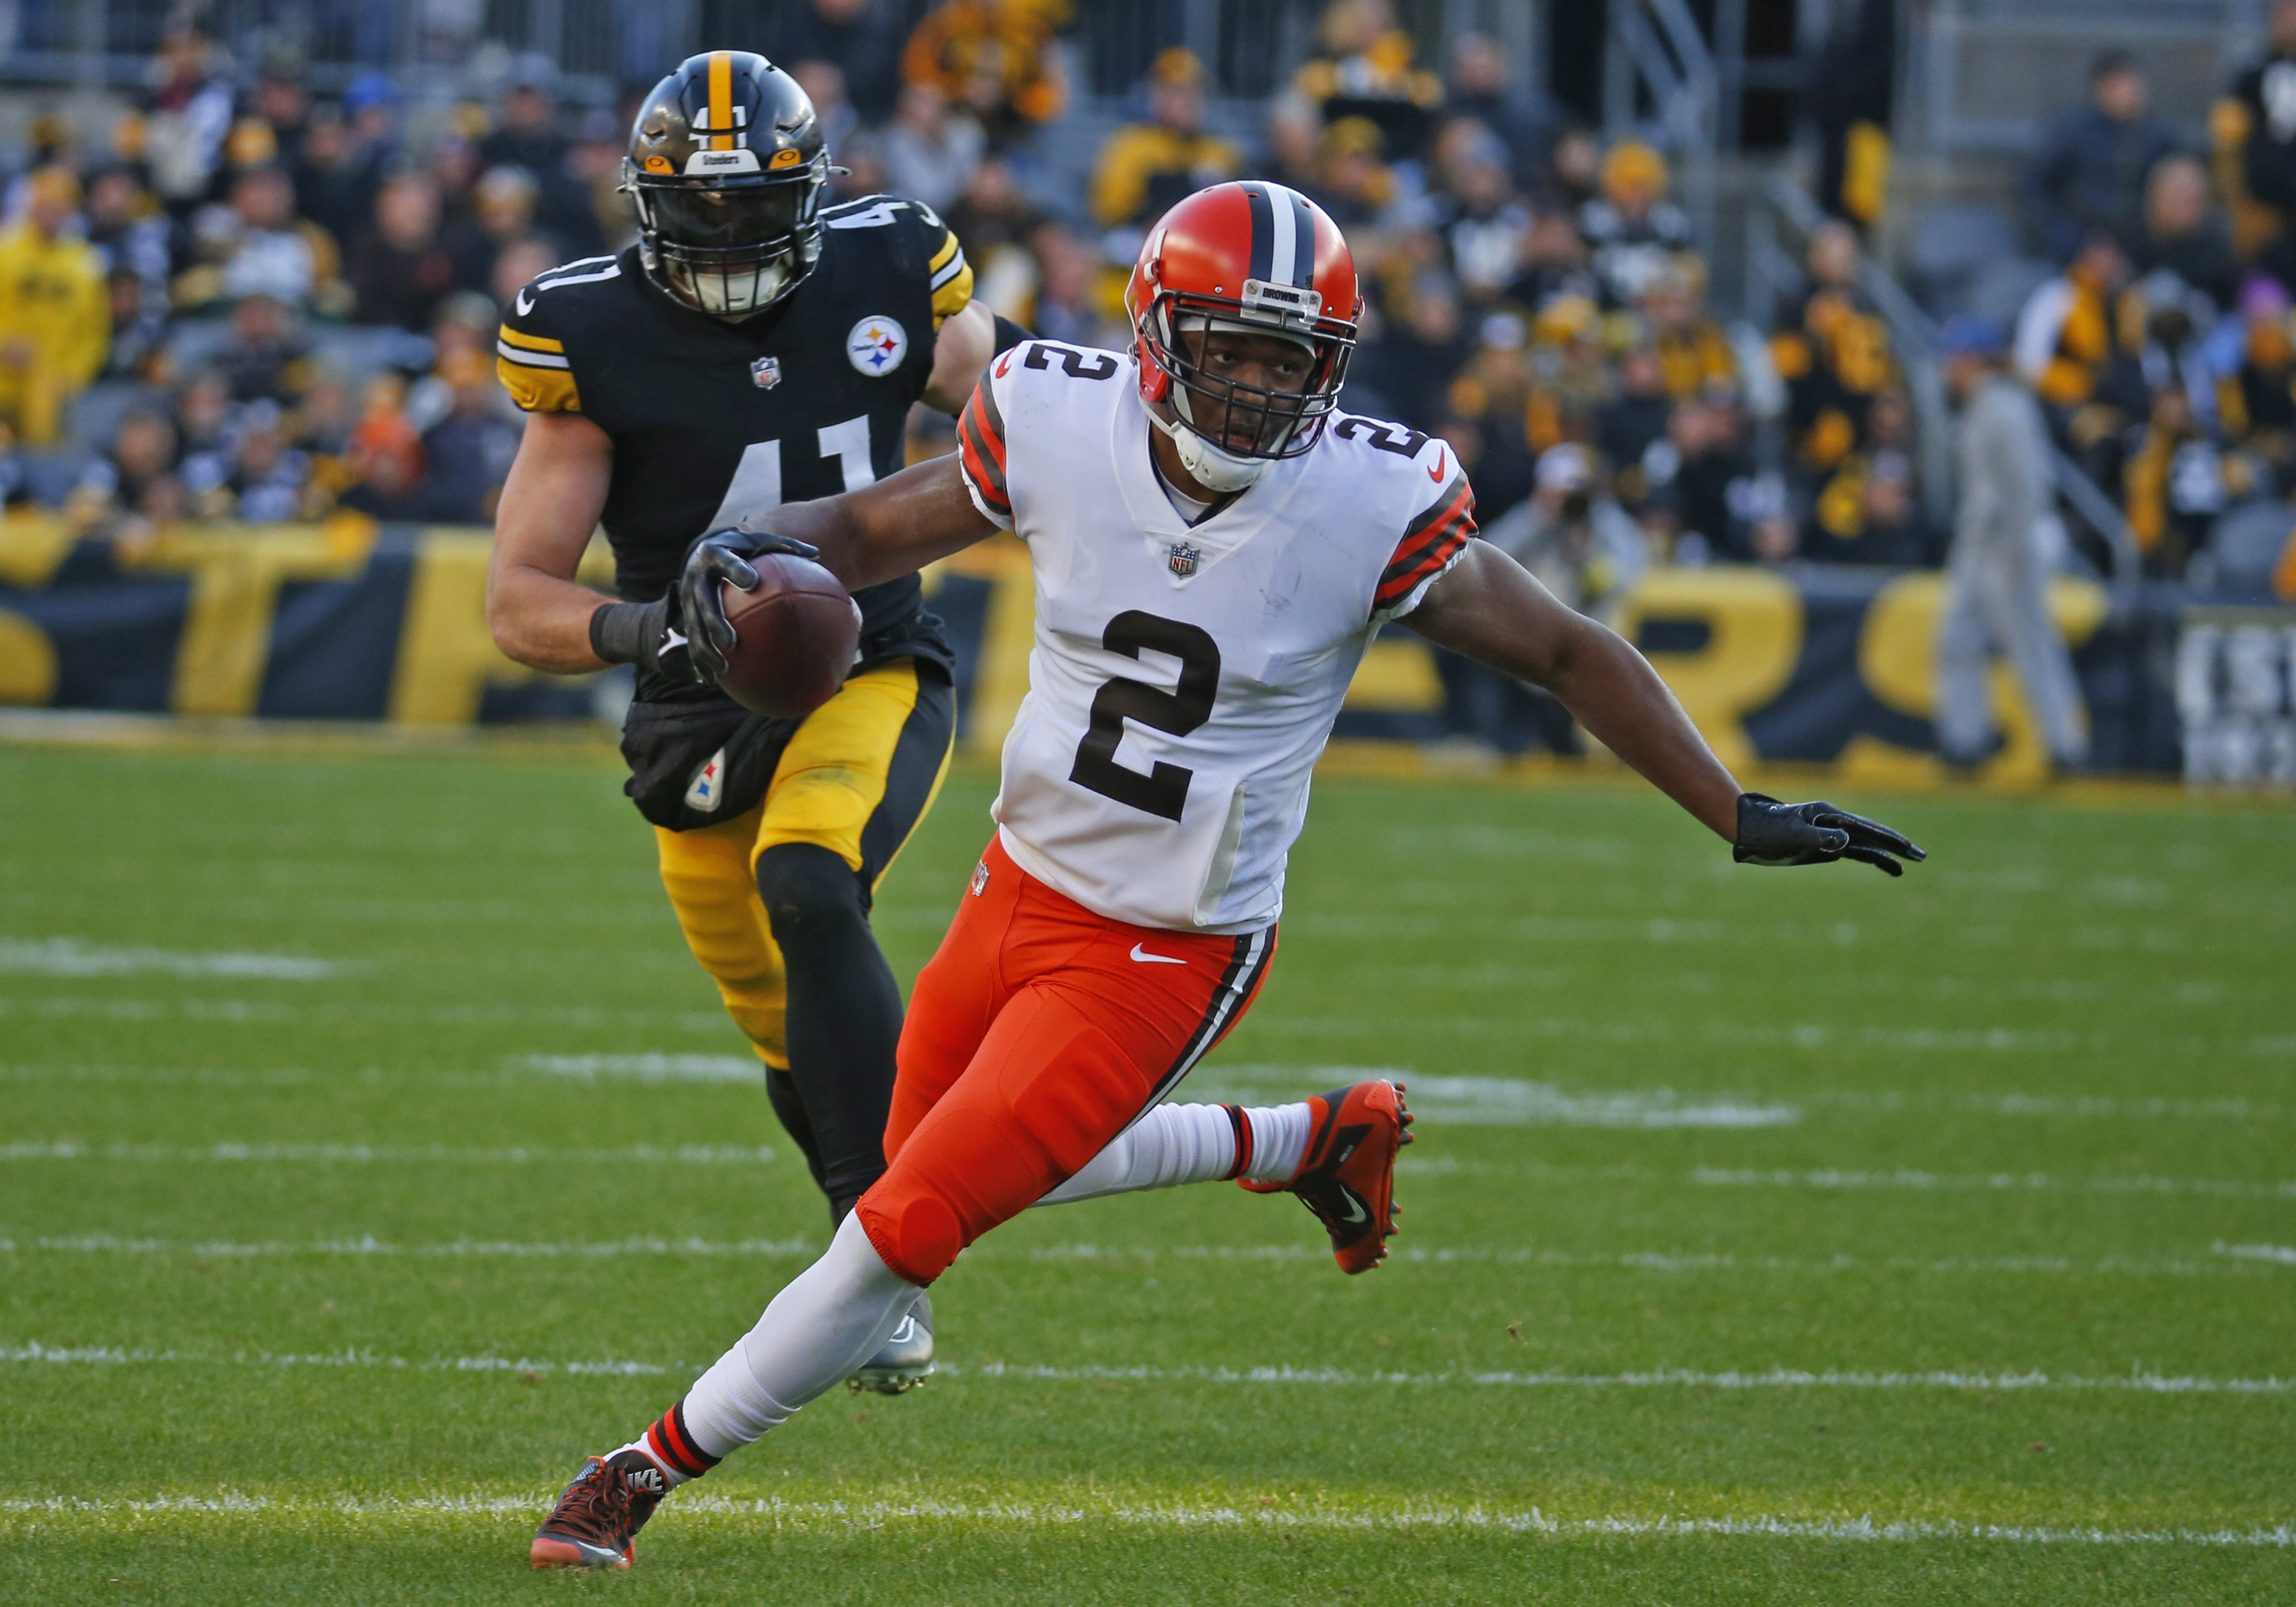 Amari Cooper #2 of the Cleveland Browns in action against the Pittsburgh Steelers on January 8, 2022 at Acrisure Stadium in Pittsburgh, Pennsylvania.